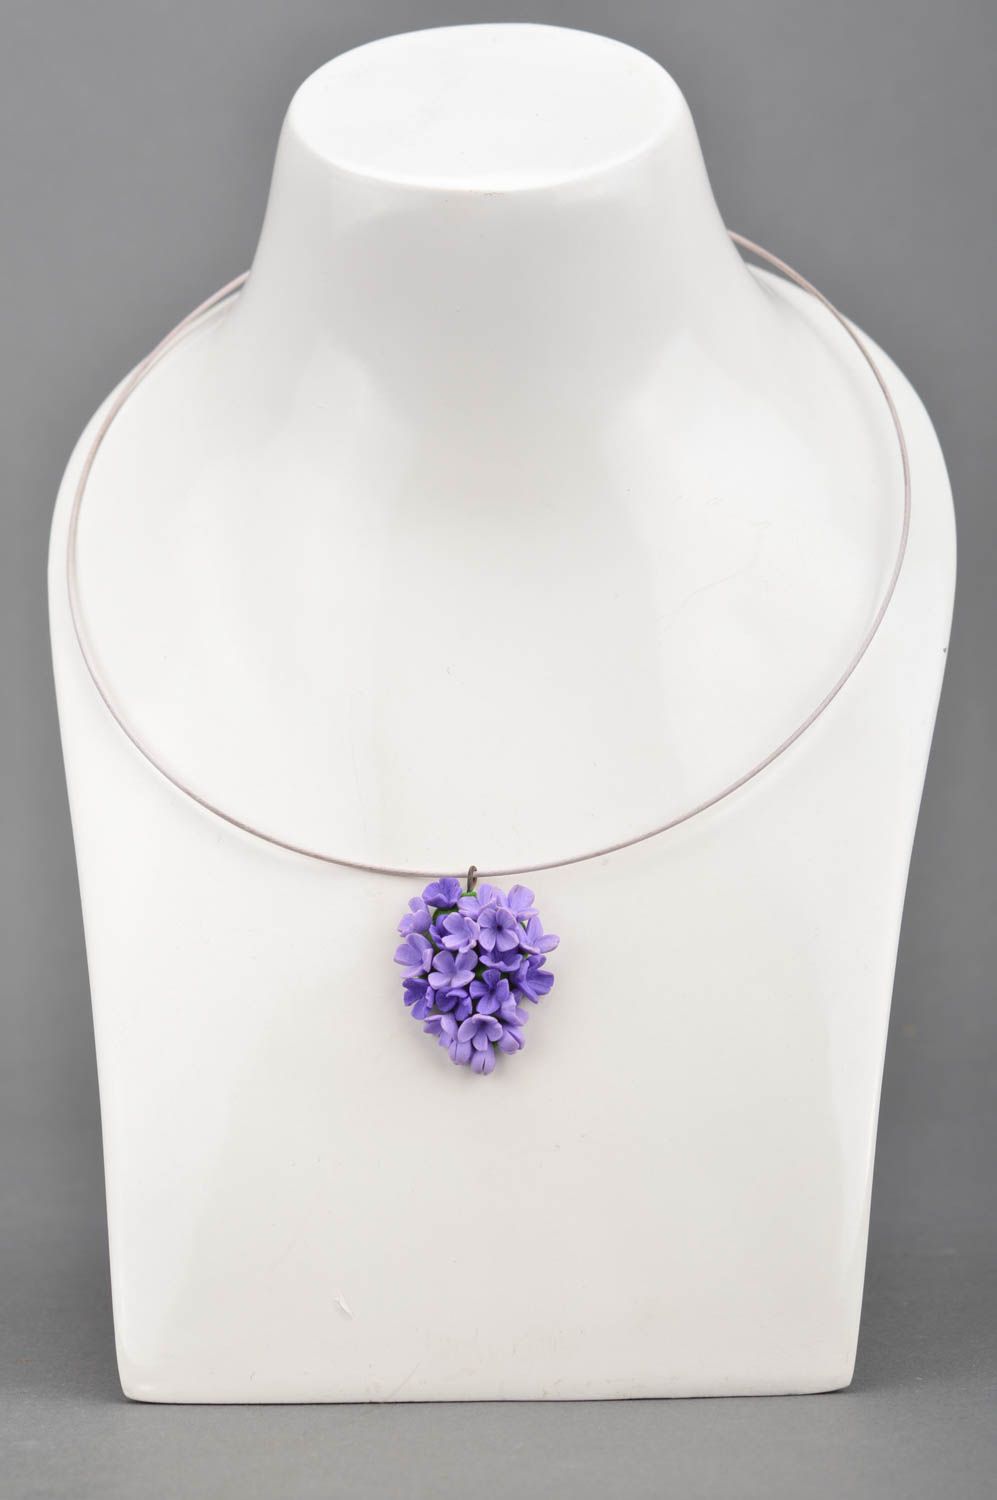 Handmade designer necklace with polymer clay tender lilac flowers pendant photo 1